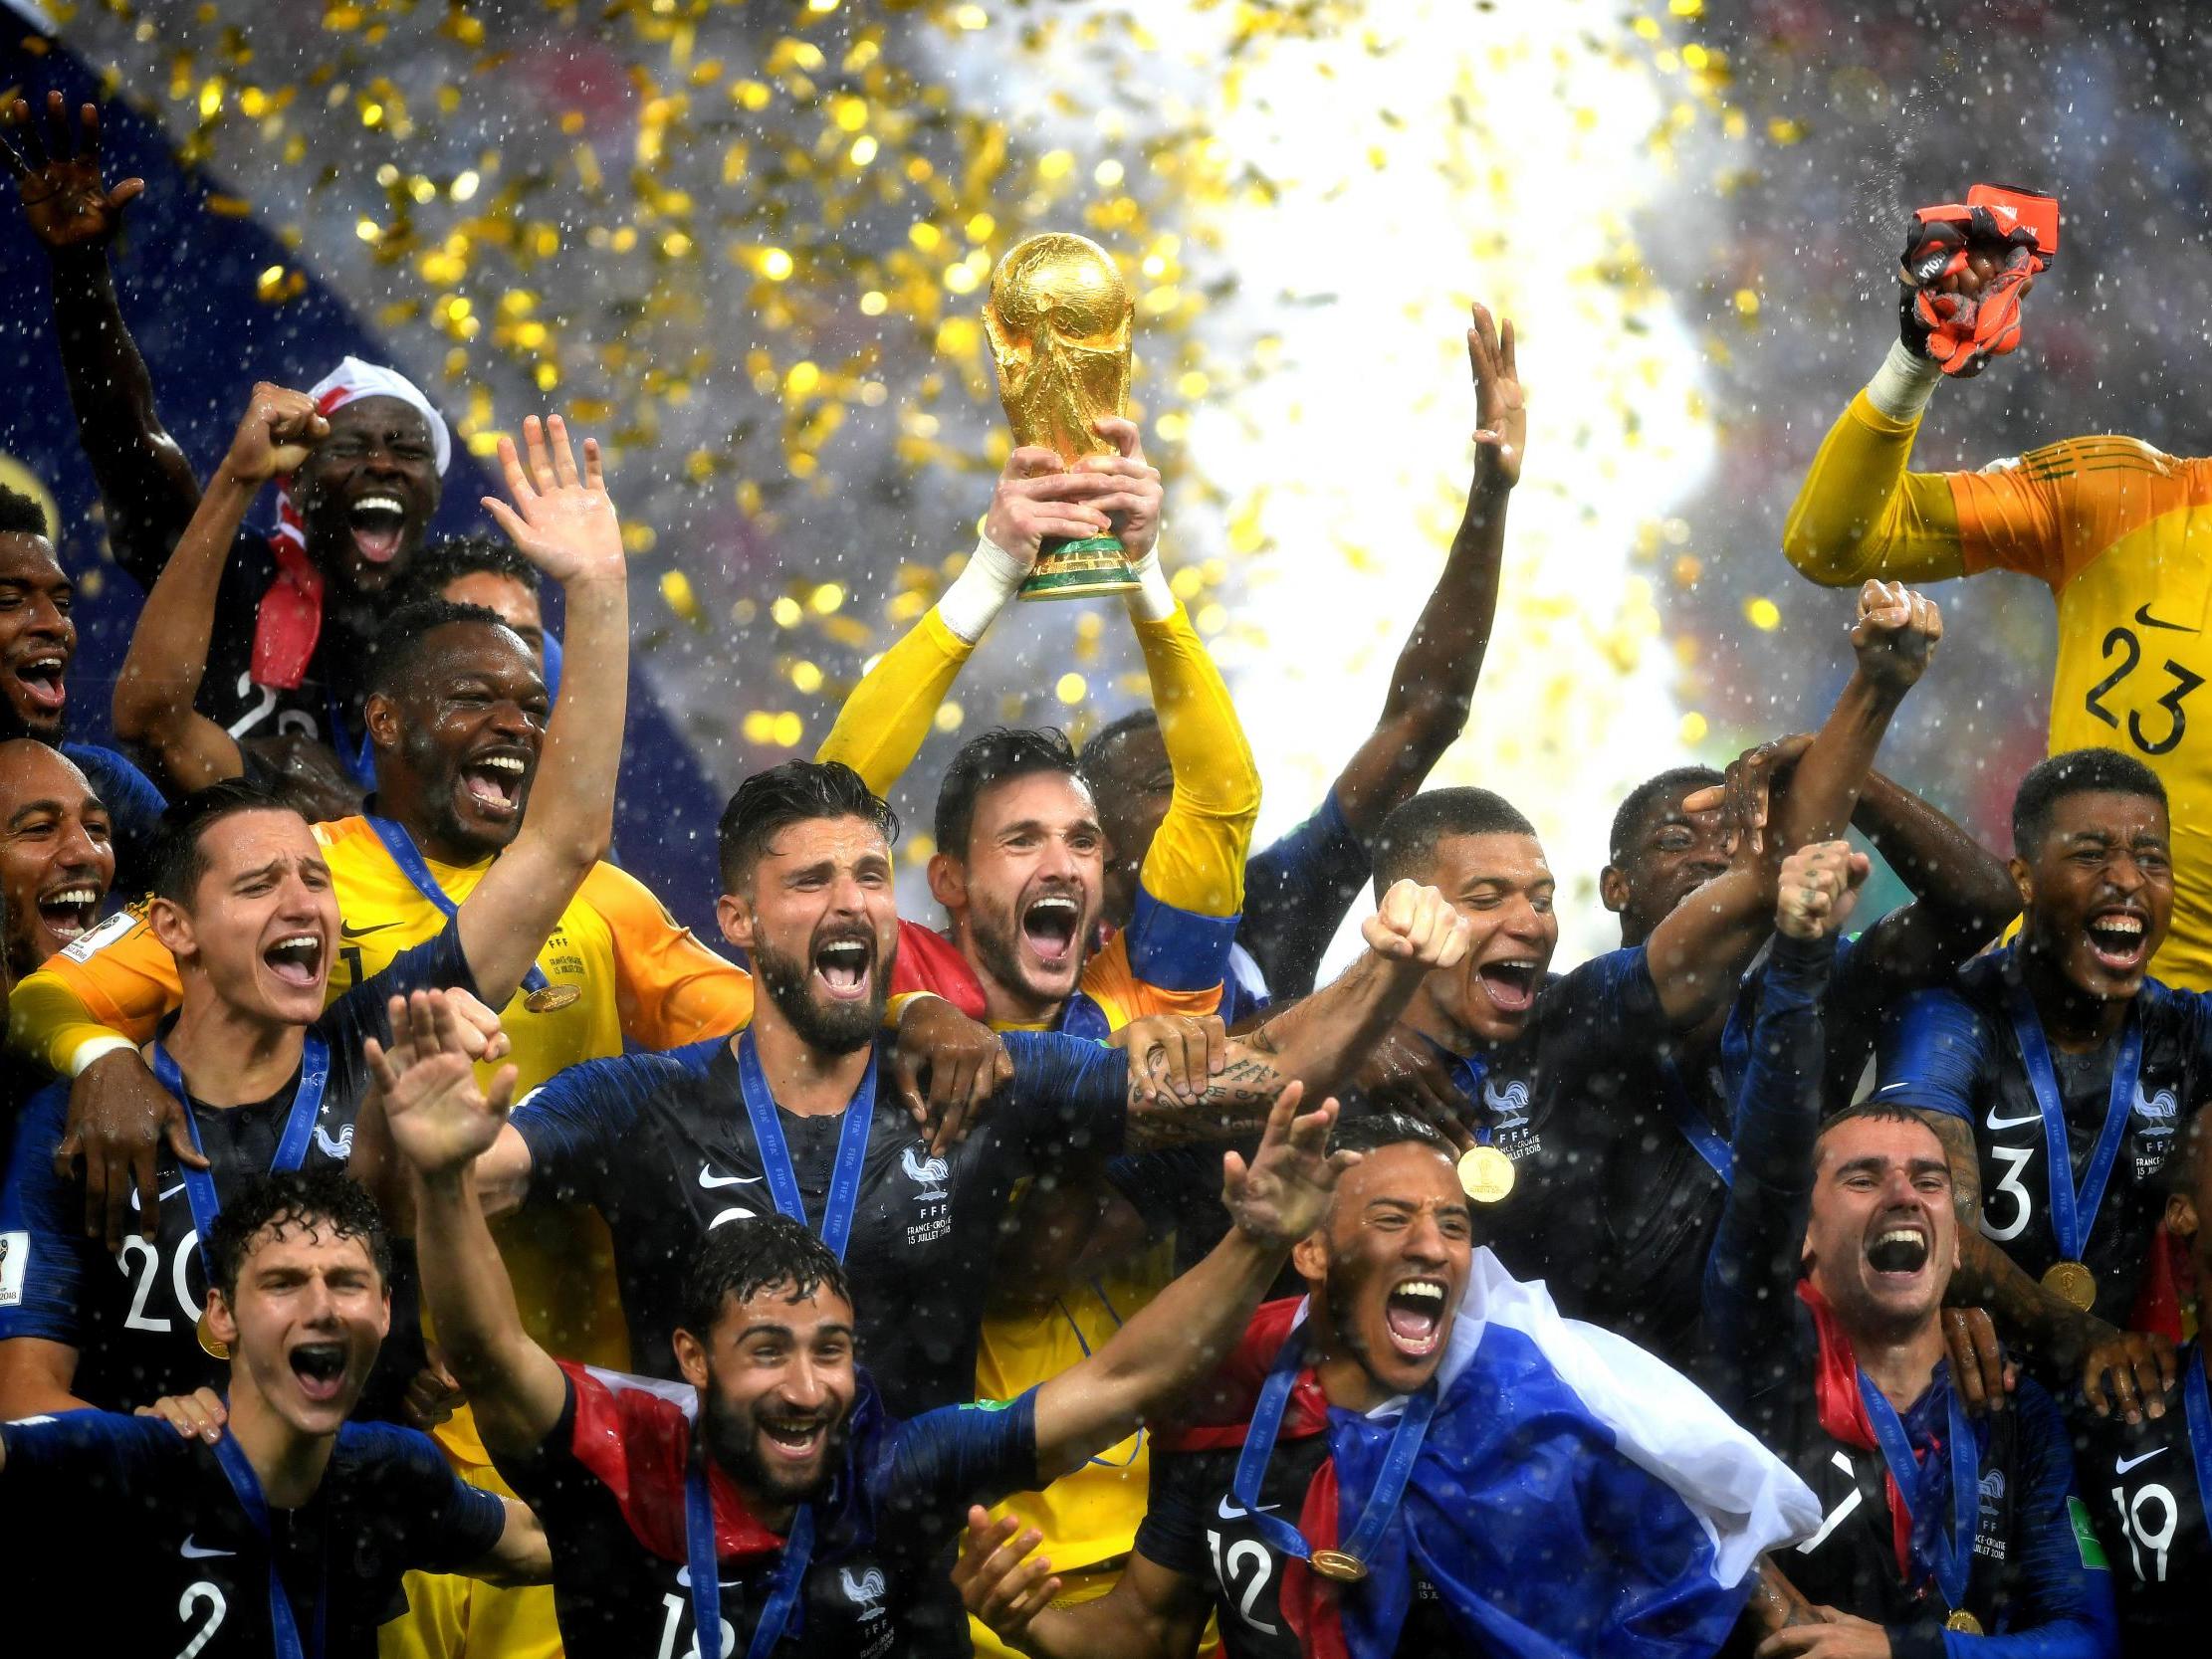 Fifa considering proposal to move World Cup to every two years